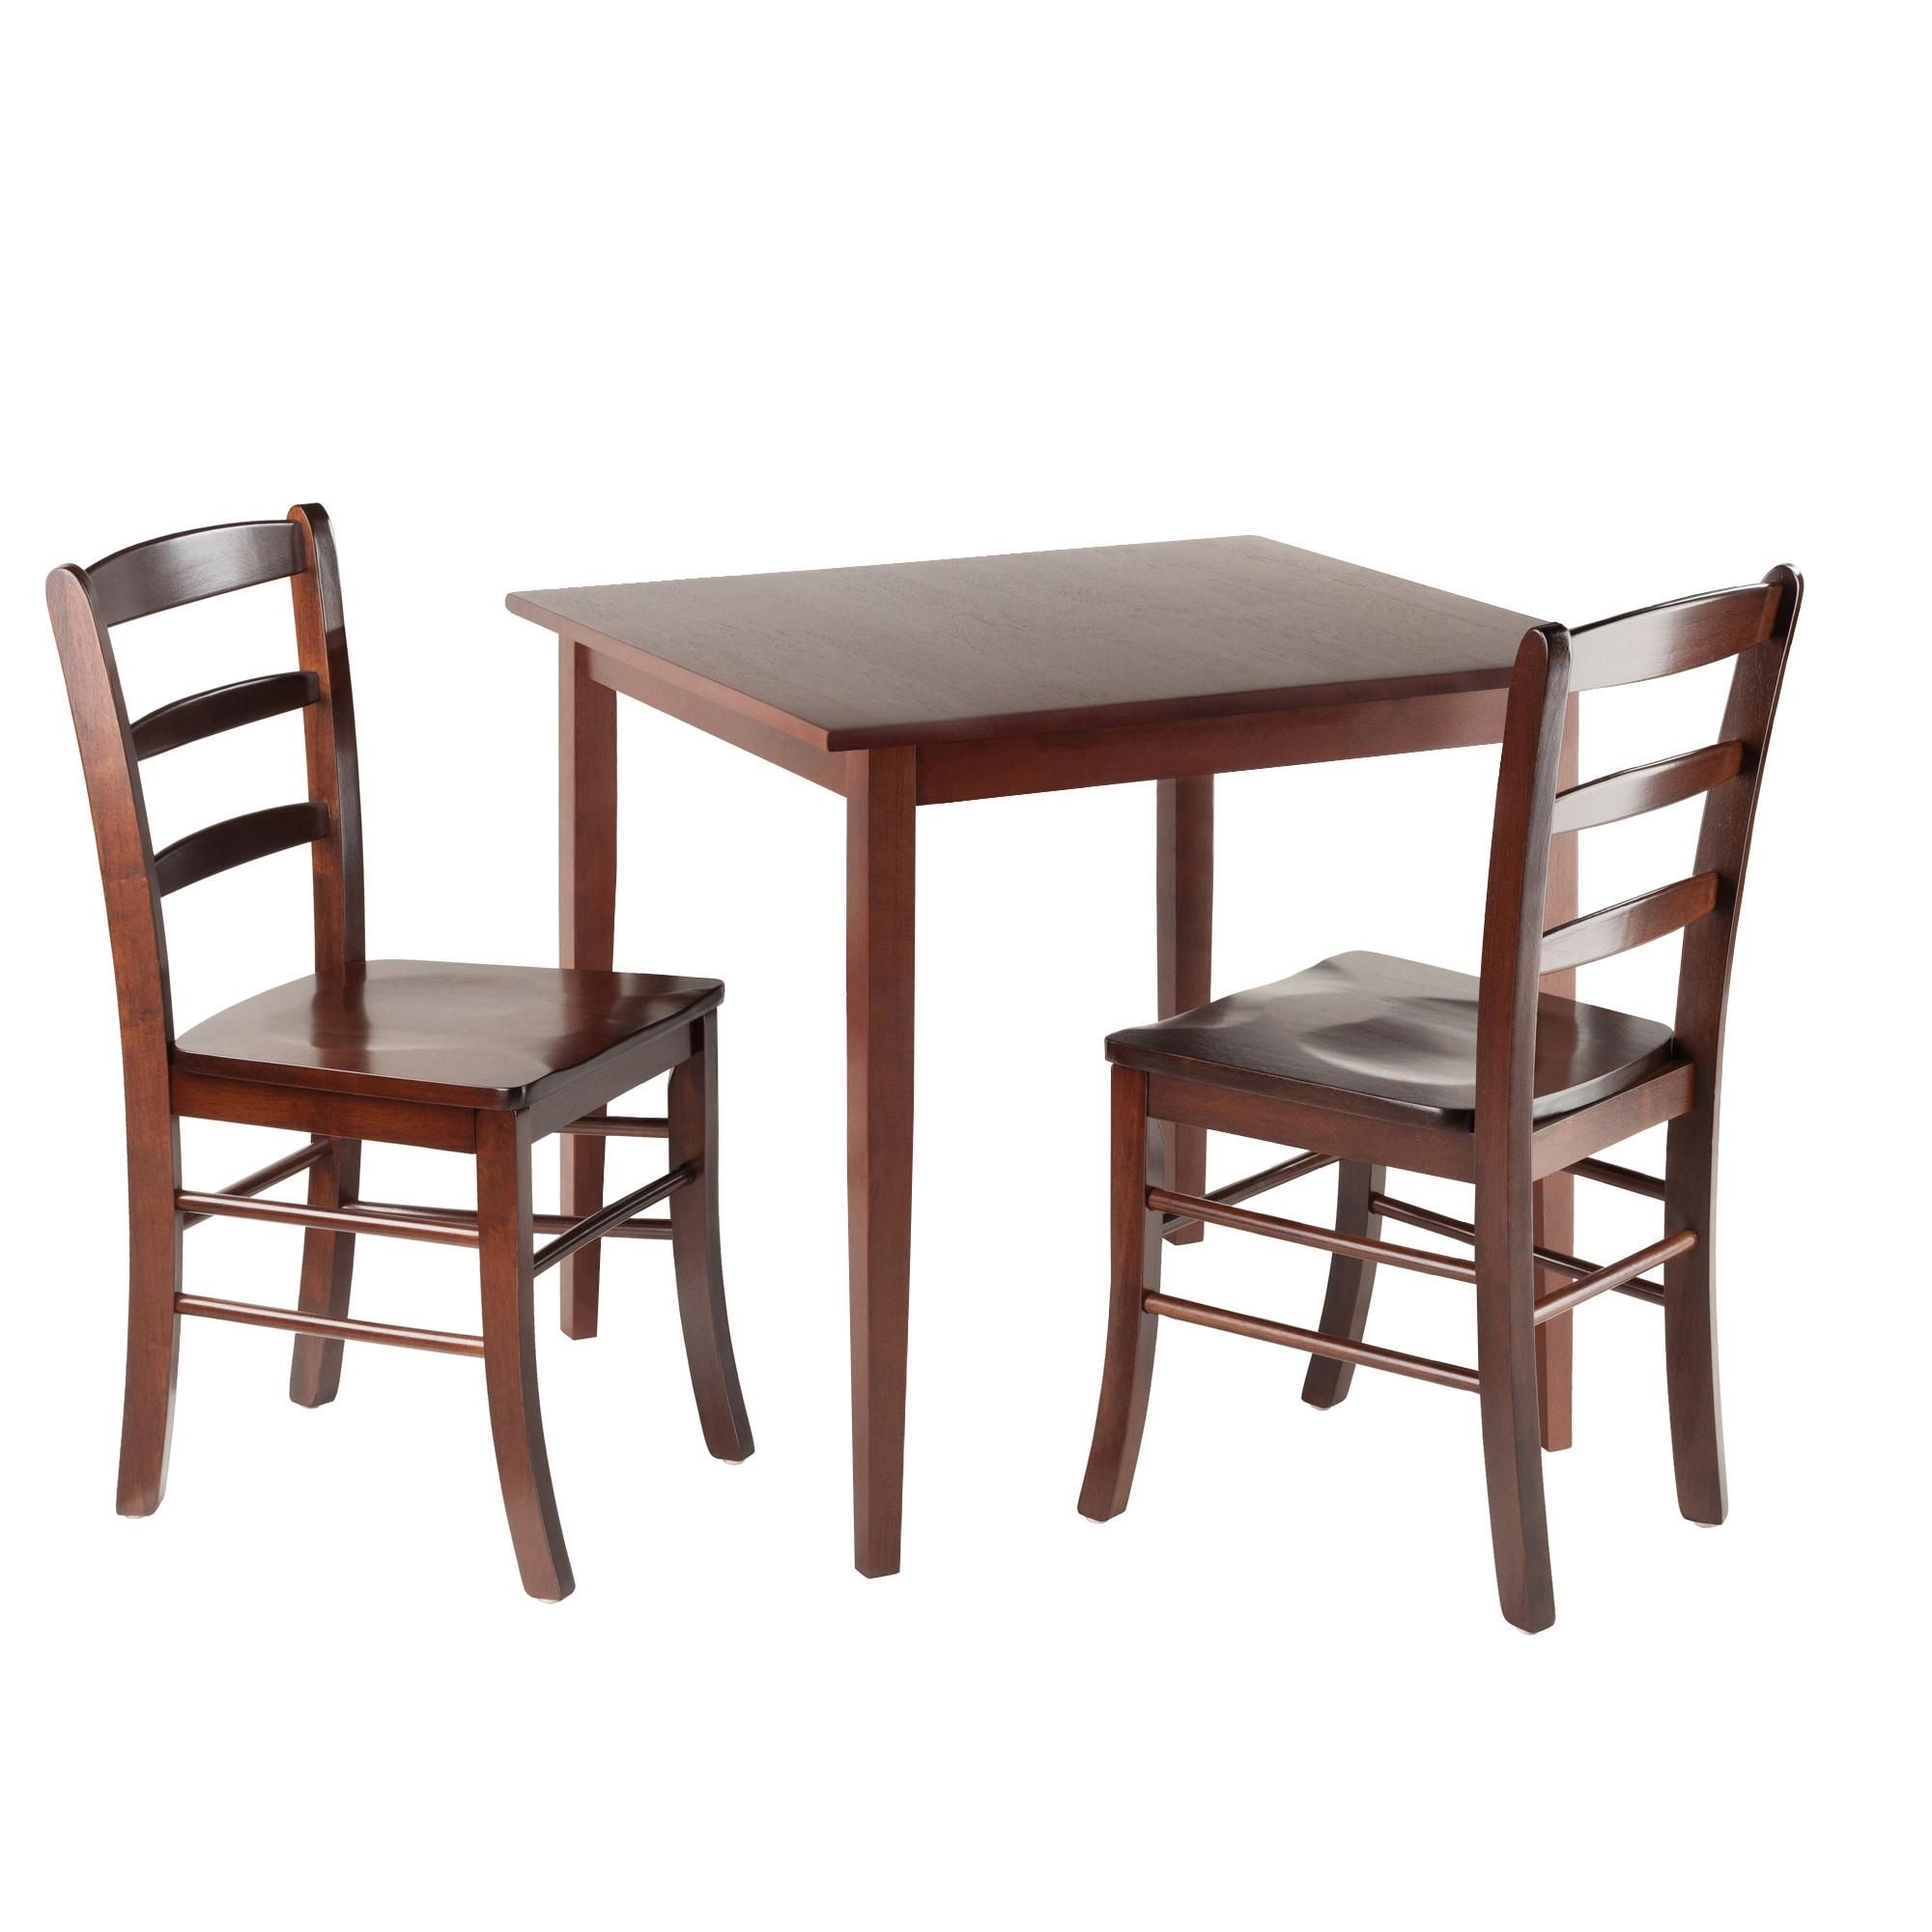 Dining Tables And 2 Chairs With Regard To Fashionable Amazon – Winsome Groveland Square Dining Table With 2 Chairs,  (View 1 of 25)